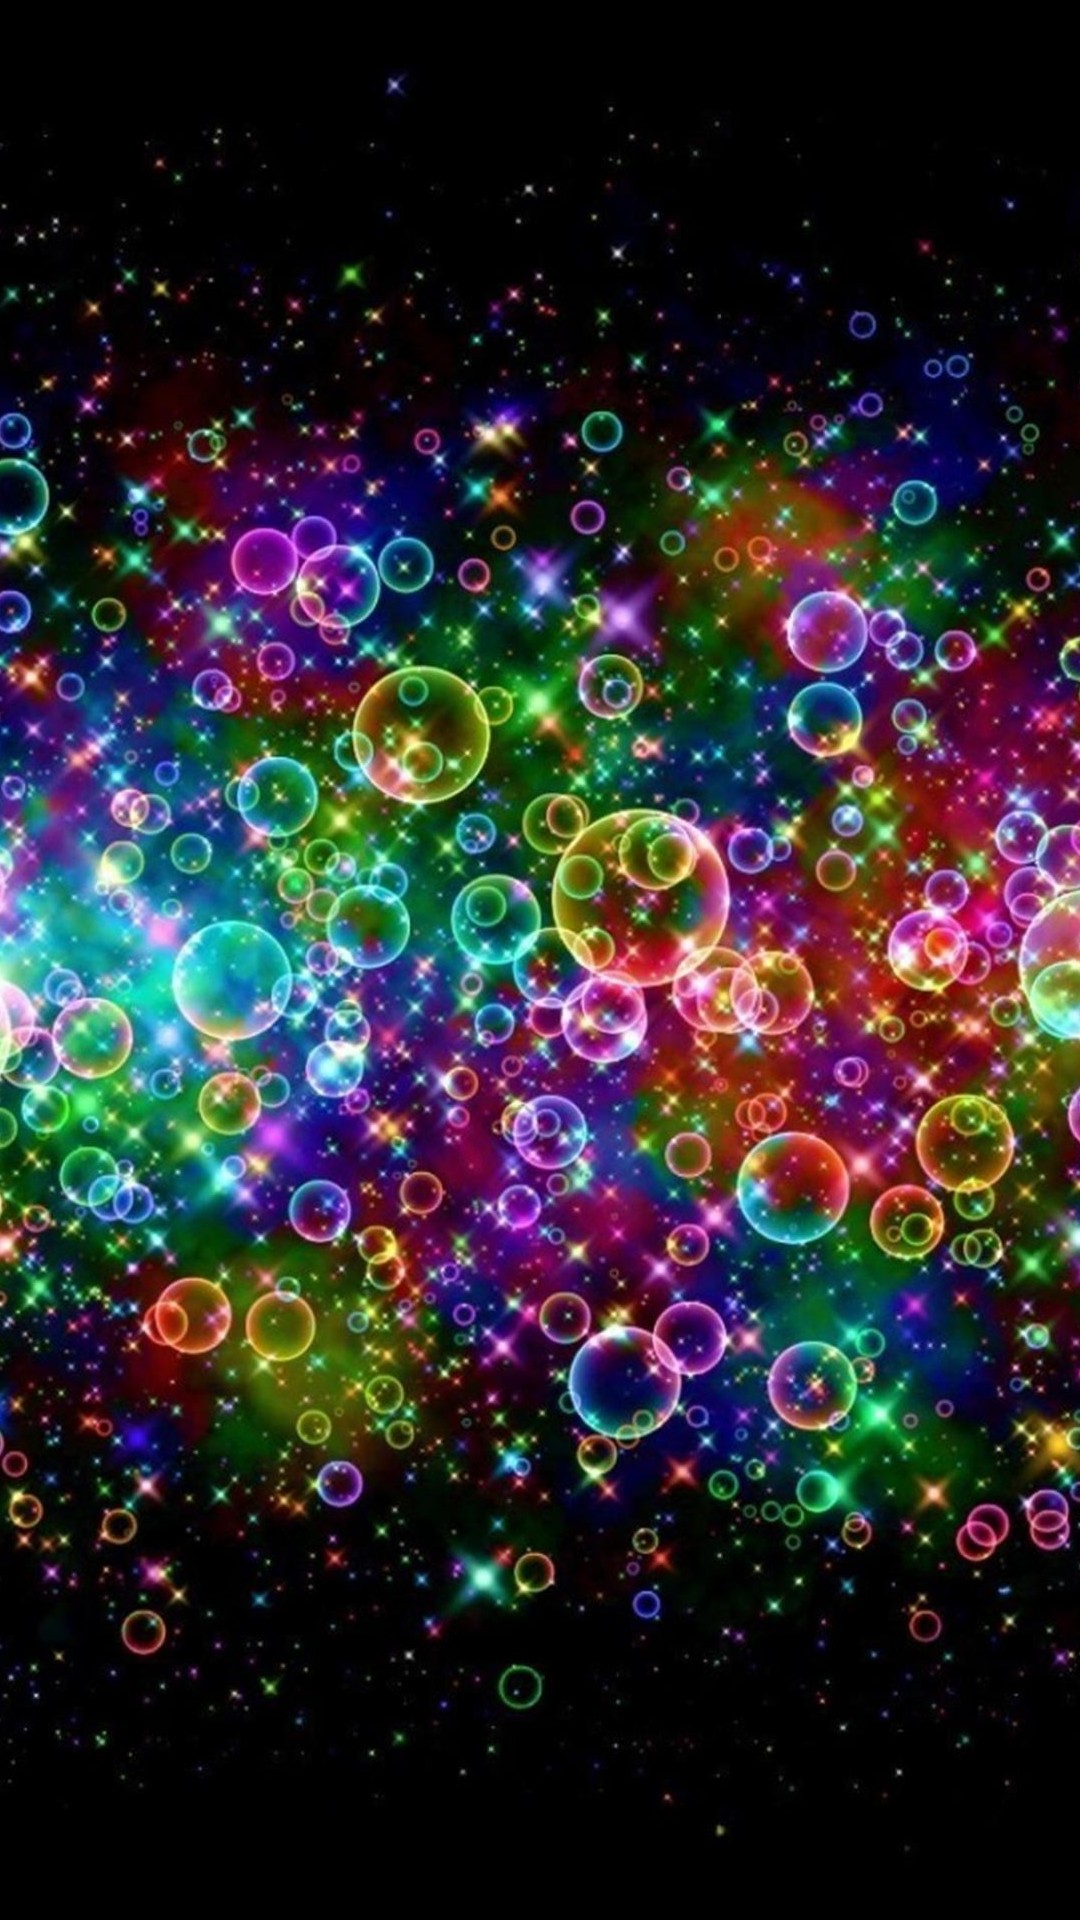 Download Magical Rainbow Galaxy Background Wallpaper | Wallpapers.com